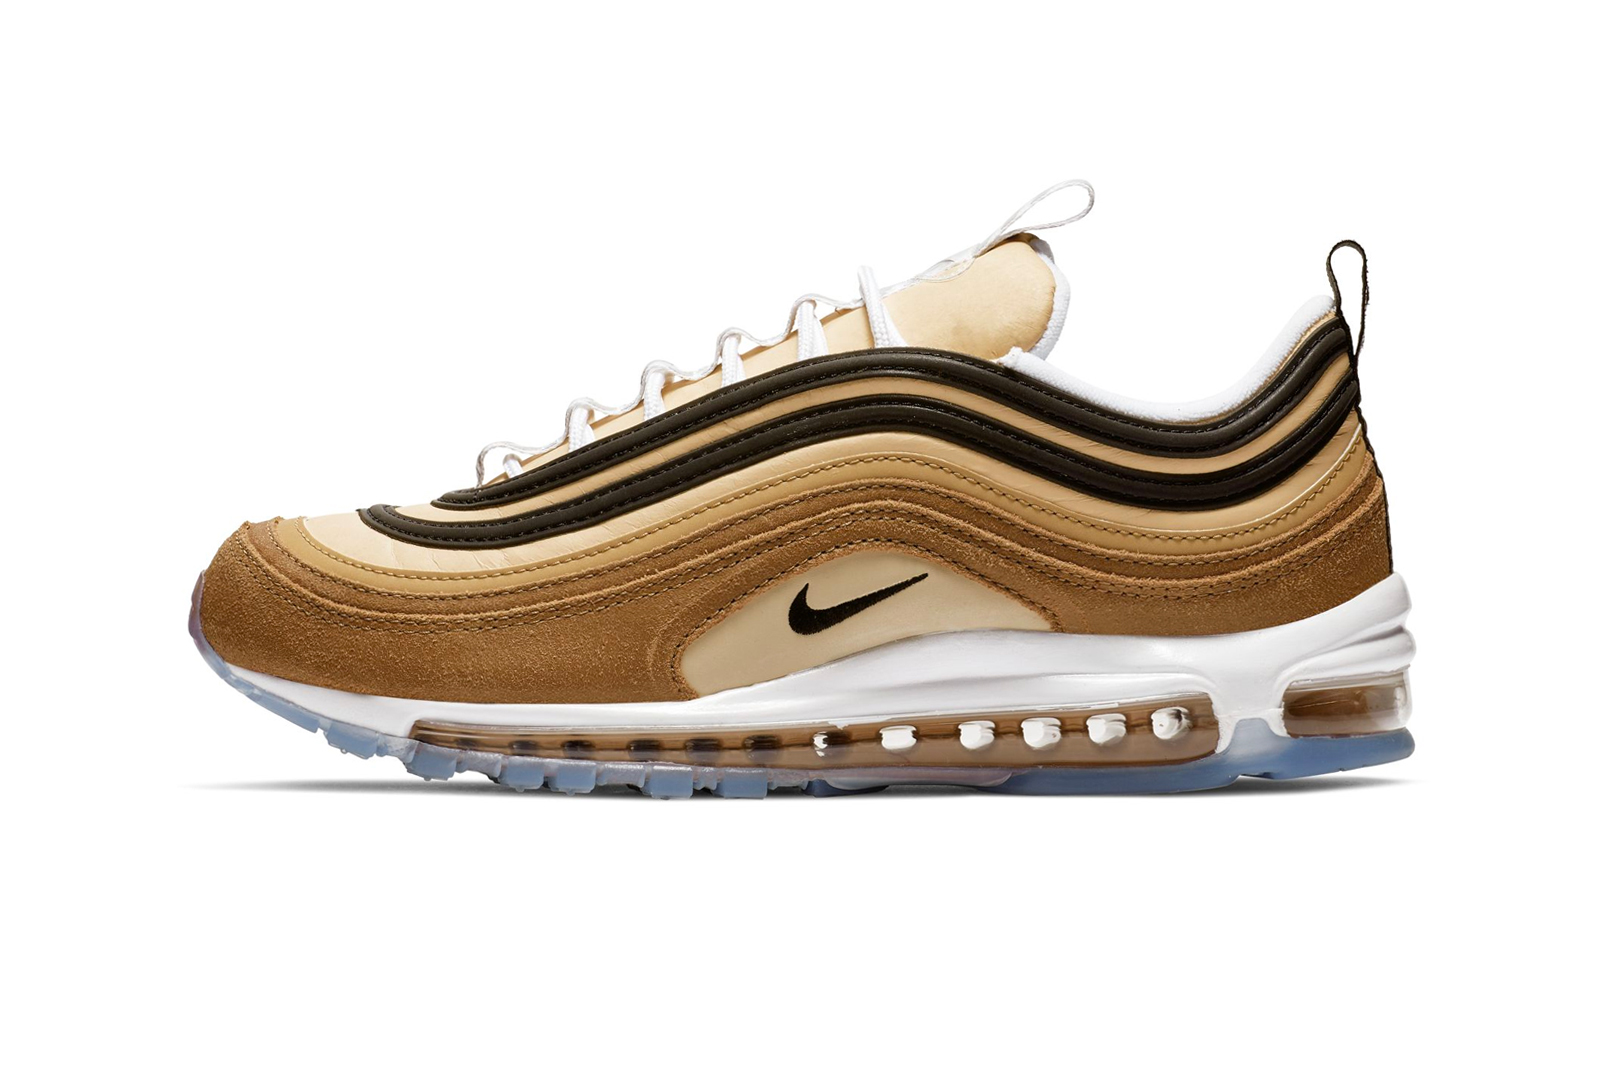 Nike Air Max 97 "Elemental Gold" Barcode Sole unit colorway release date info ALE BROWN / BLACK - ELEMENTAL GOLD